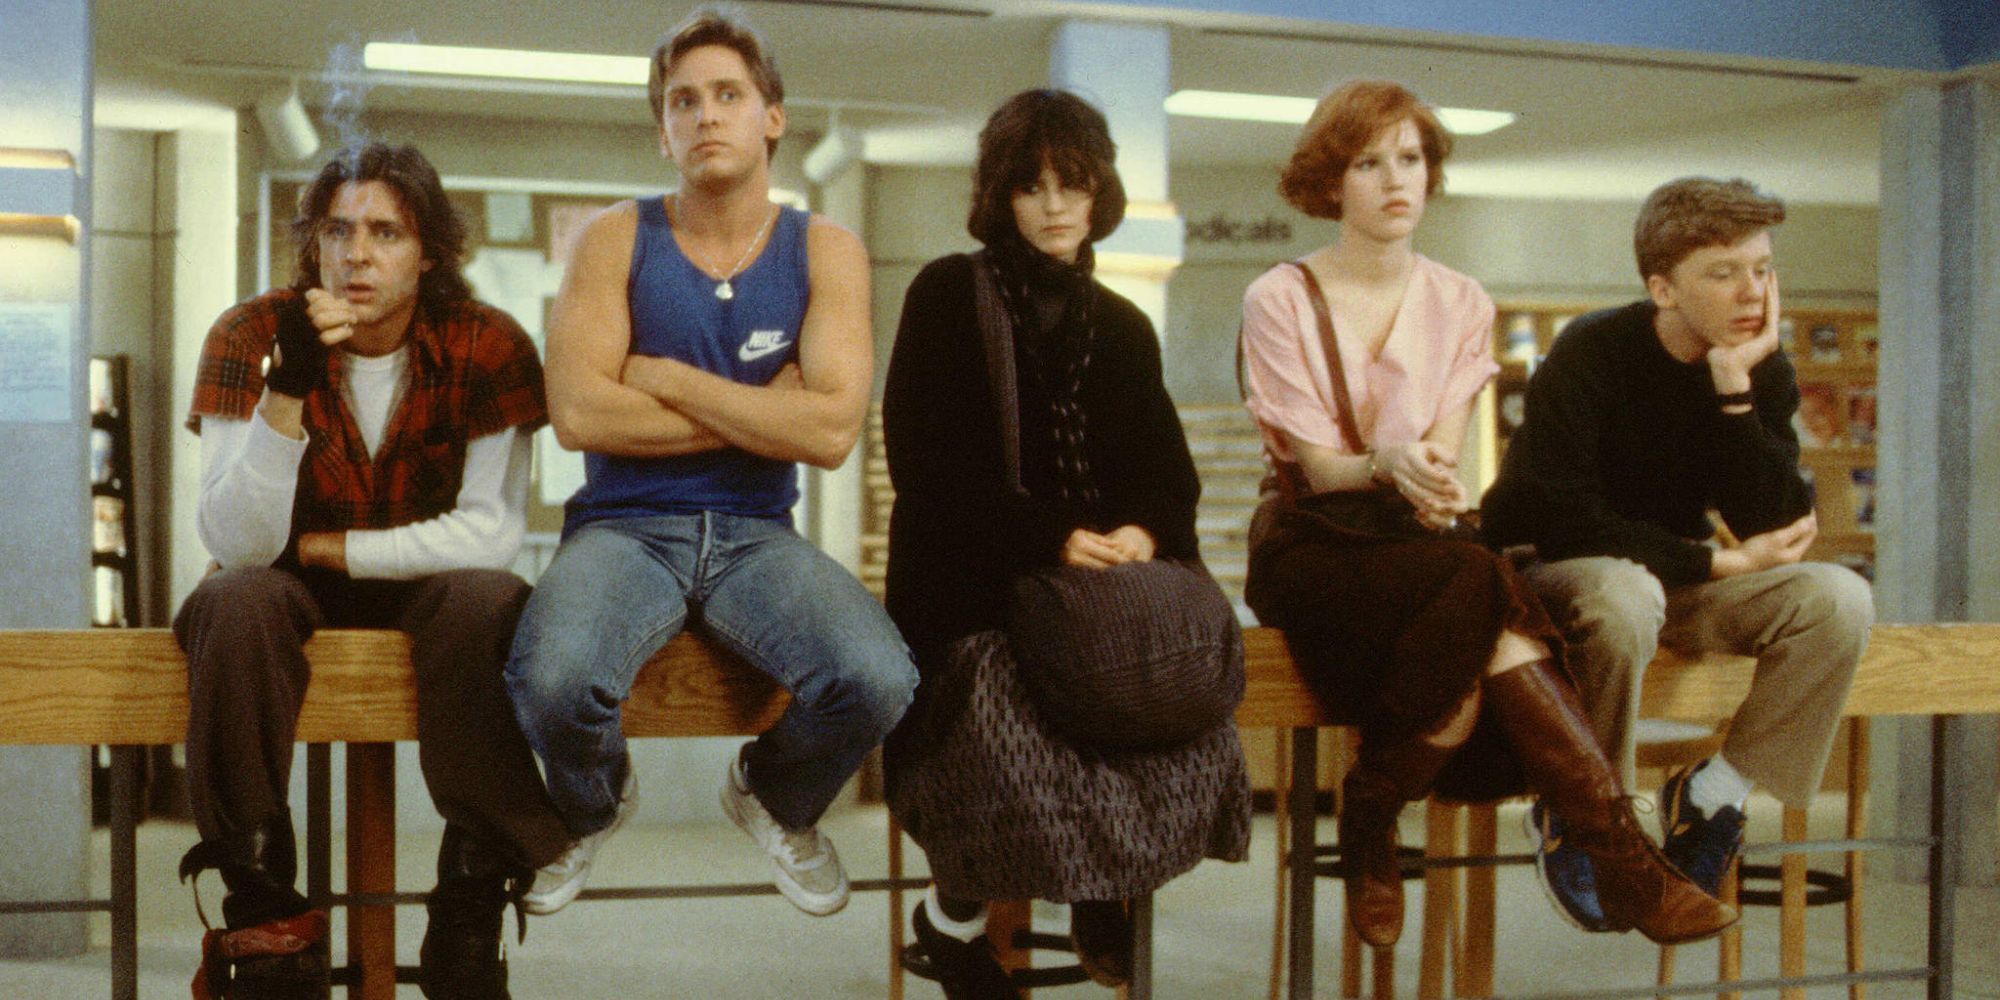 The main cast of The Breakfast Club’ sitting on a bannister side by side.